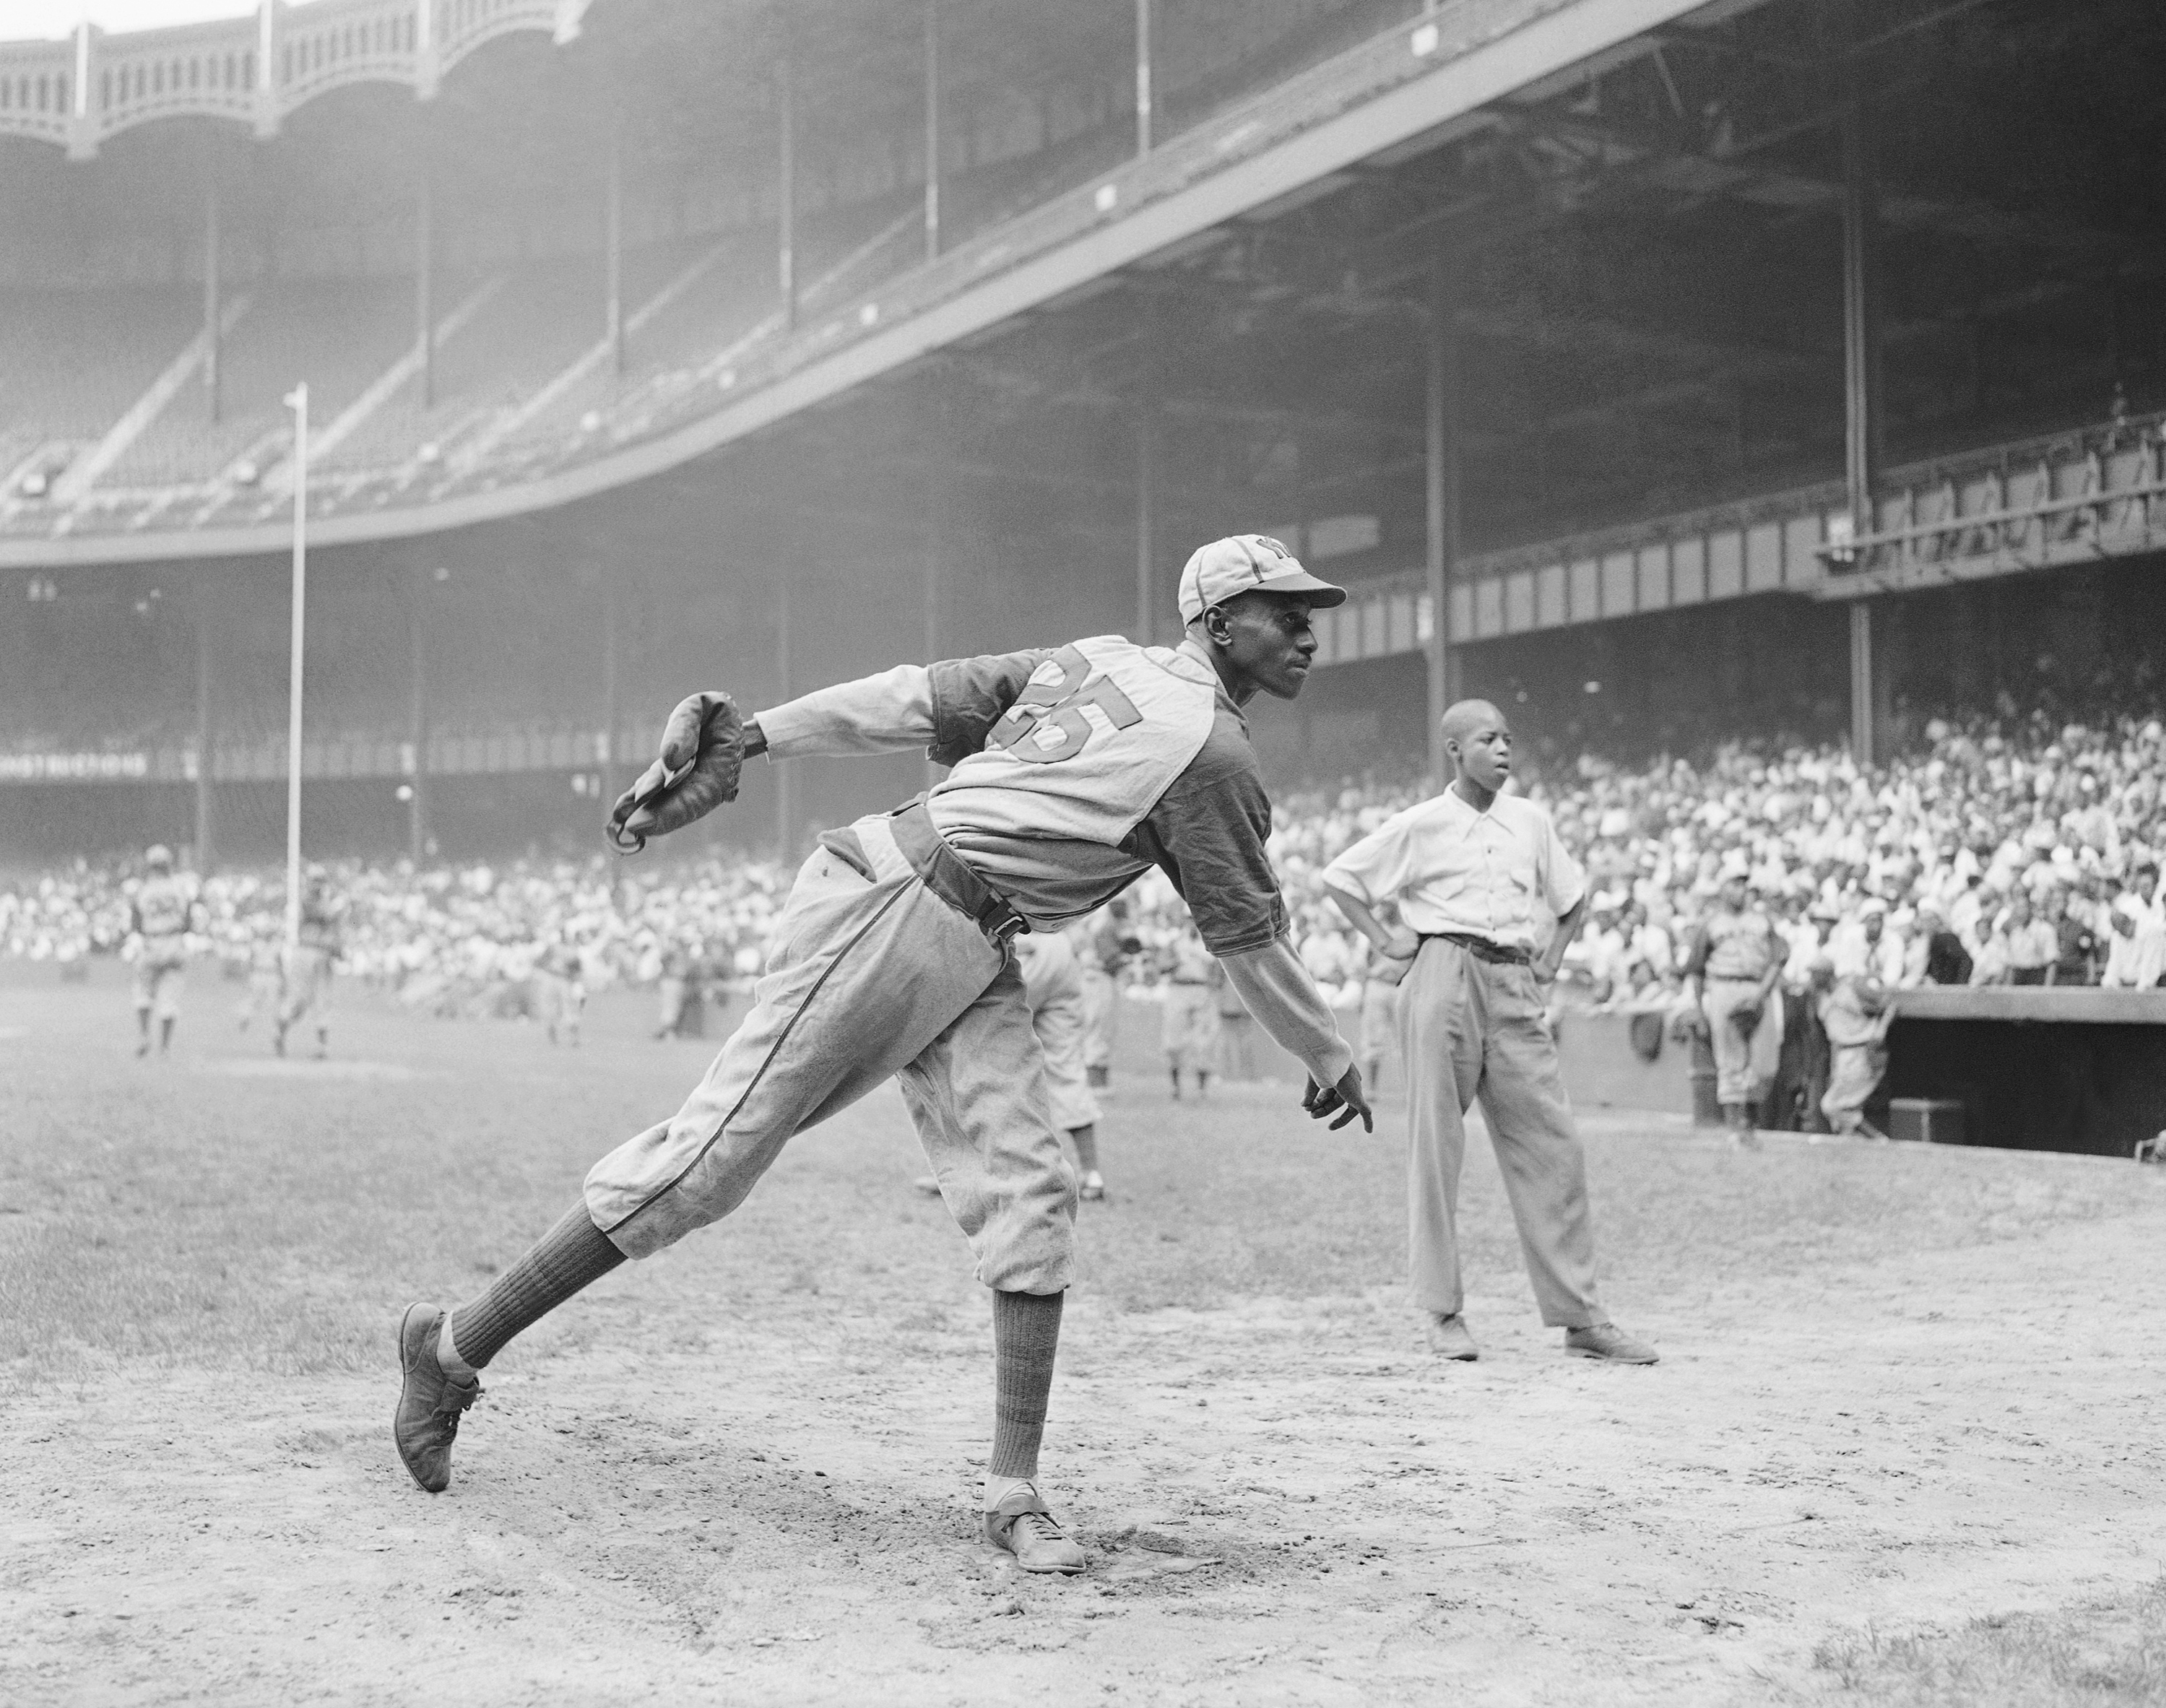 Kansas City Monarchs pitcher Satchel Paige warms up at New York's Yankee Stadium on Aug. 2, 1942, for a Negro League game between the Monarchs and the New York Cuban Stars.